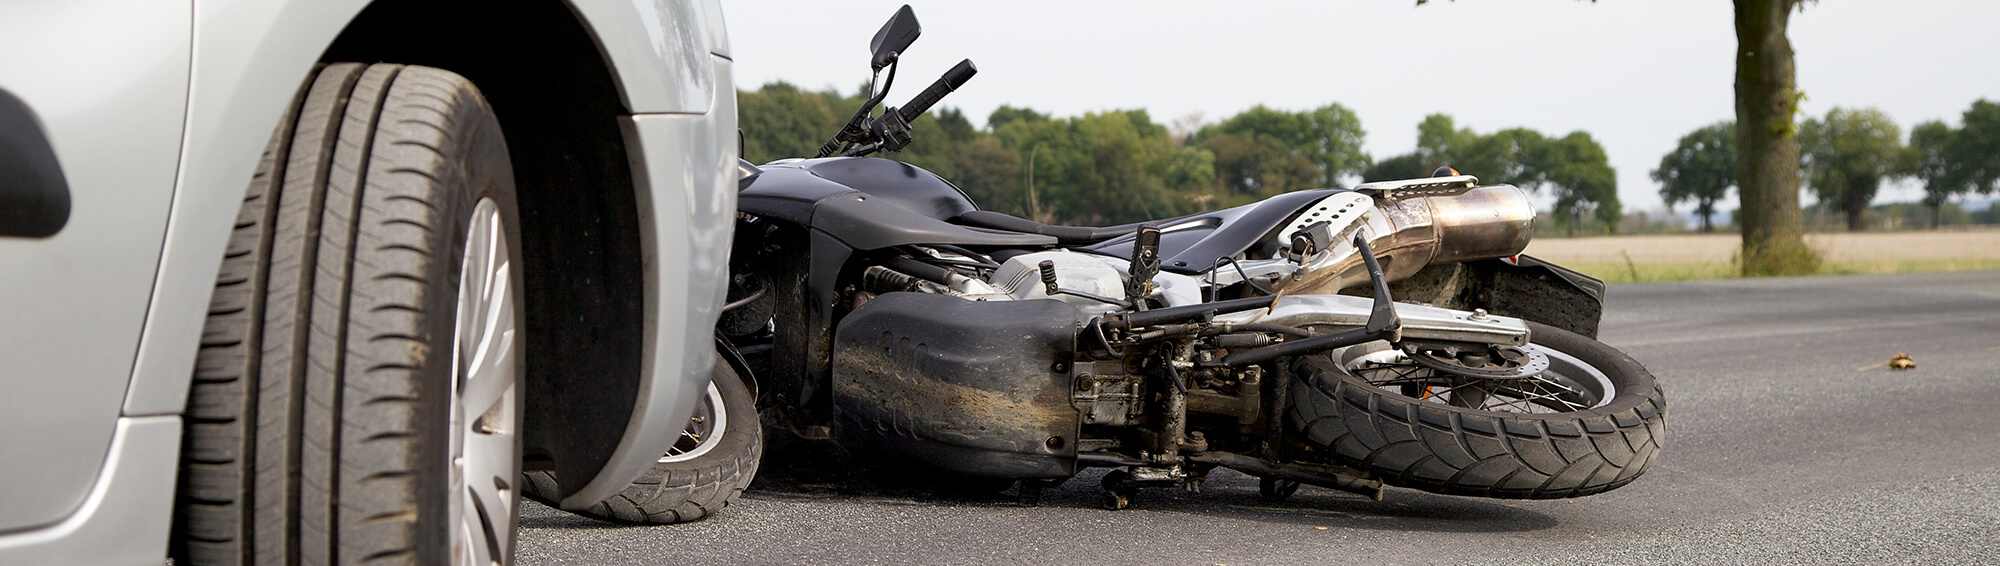 Drivers Are Responsible for Watching Out for Motorcyclists